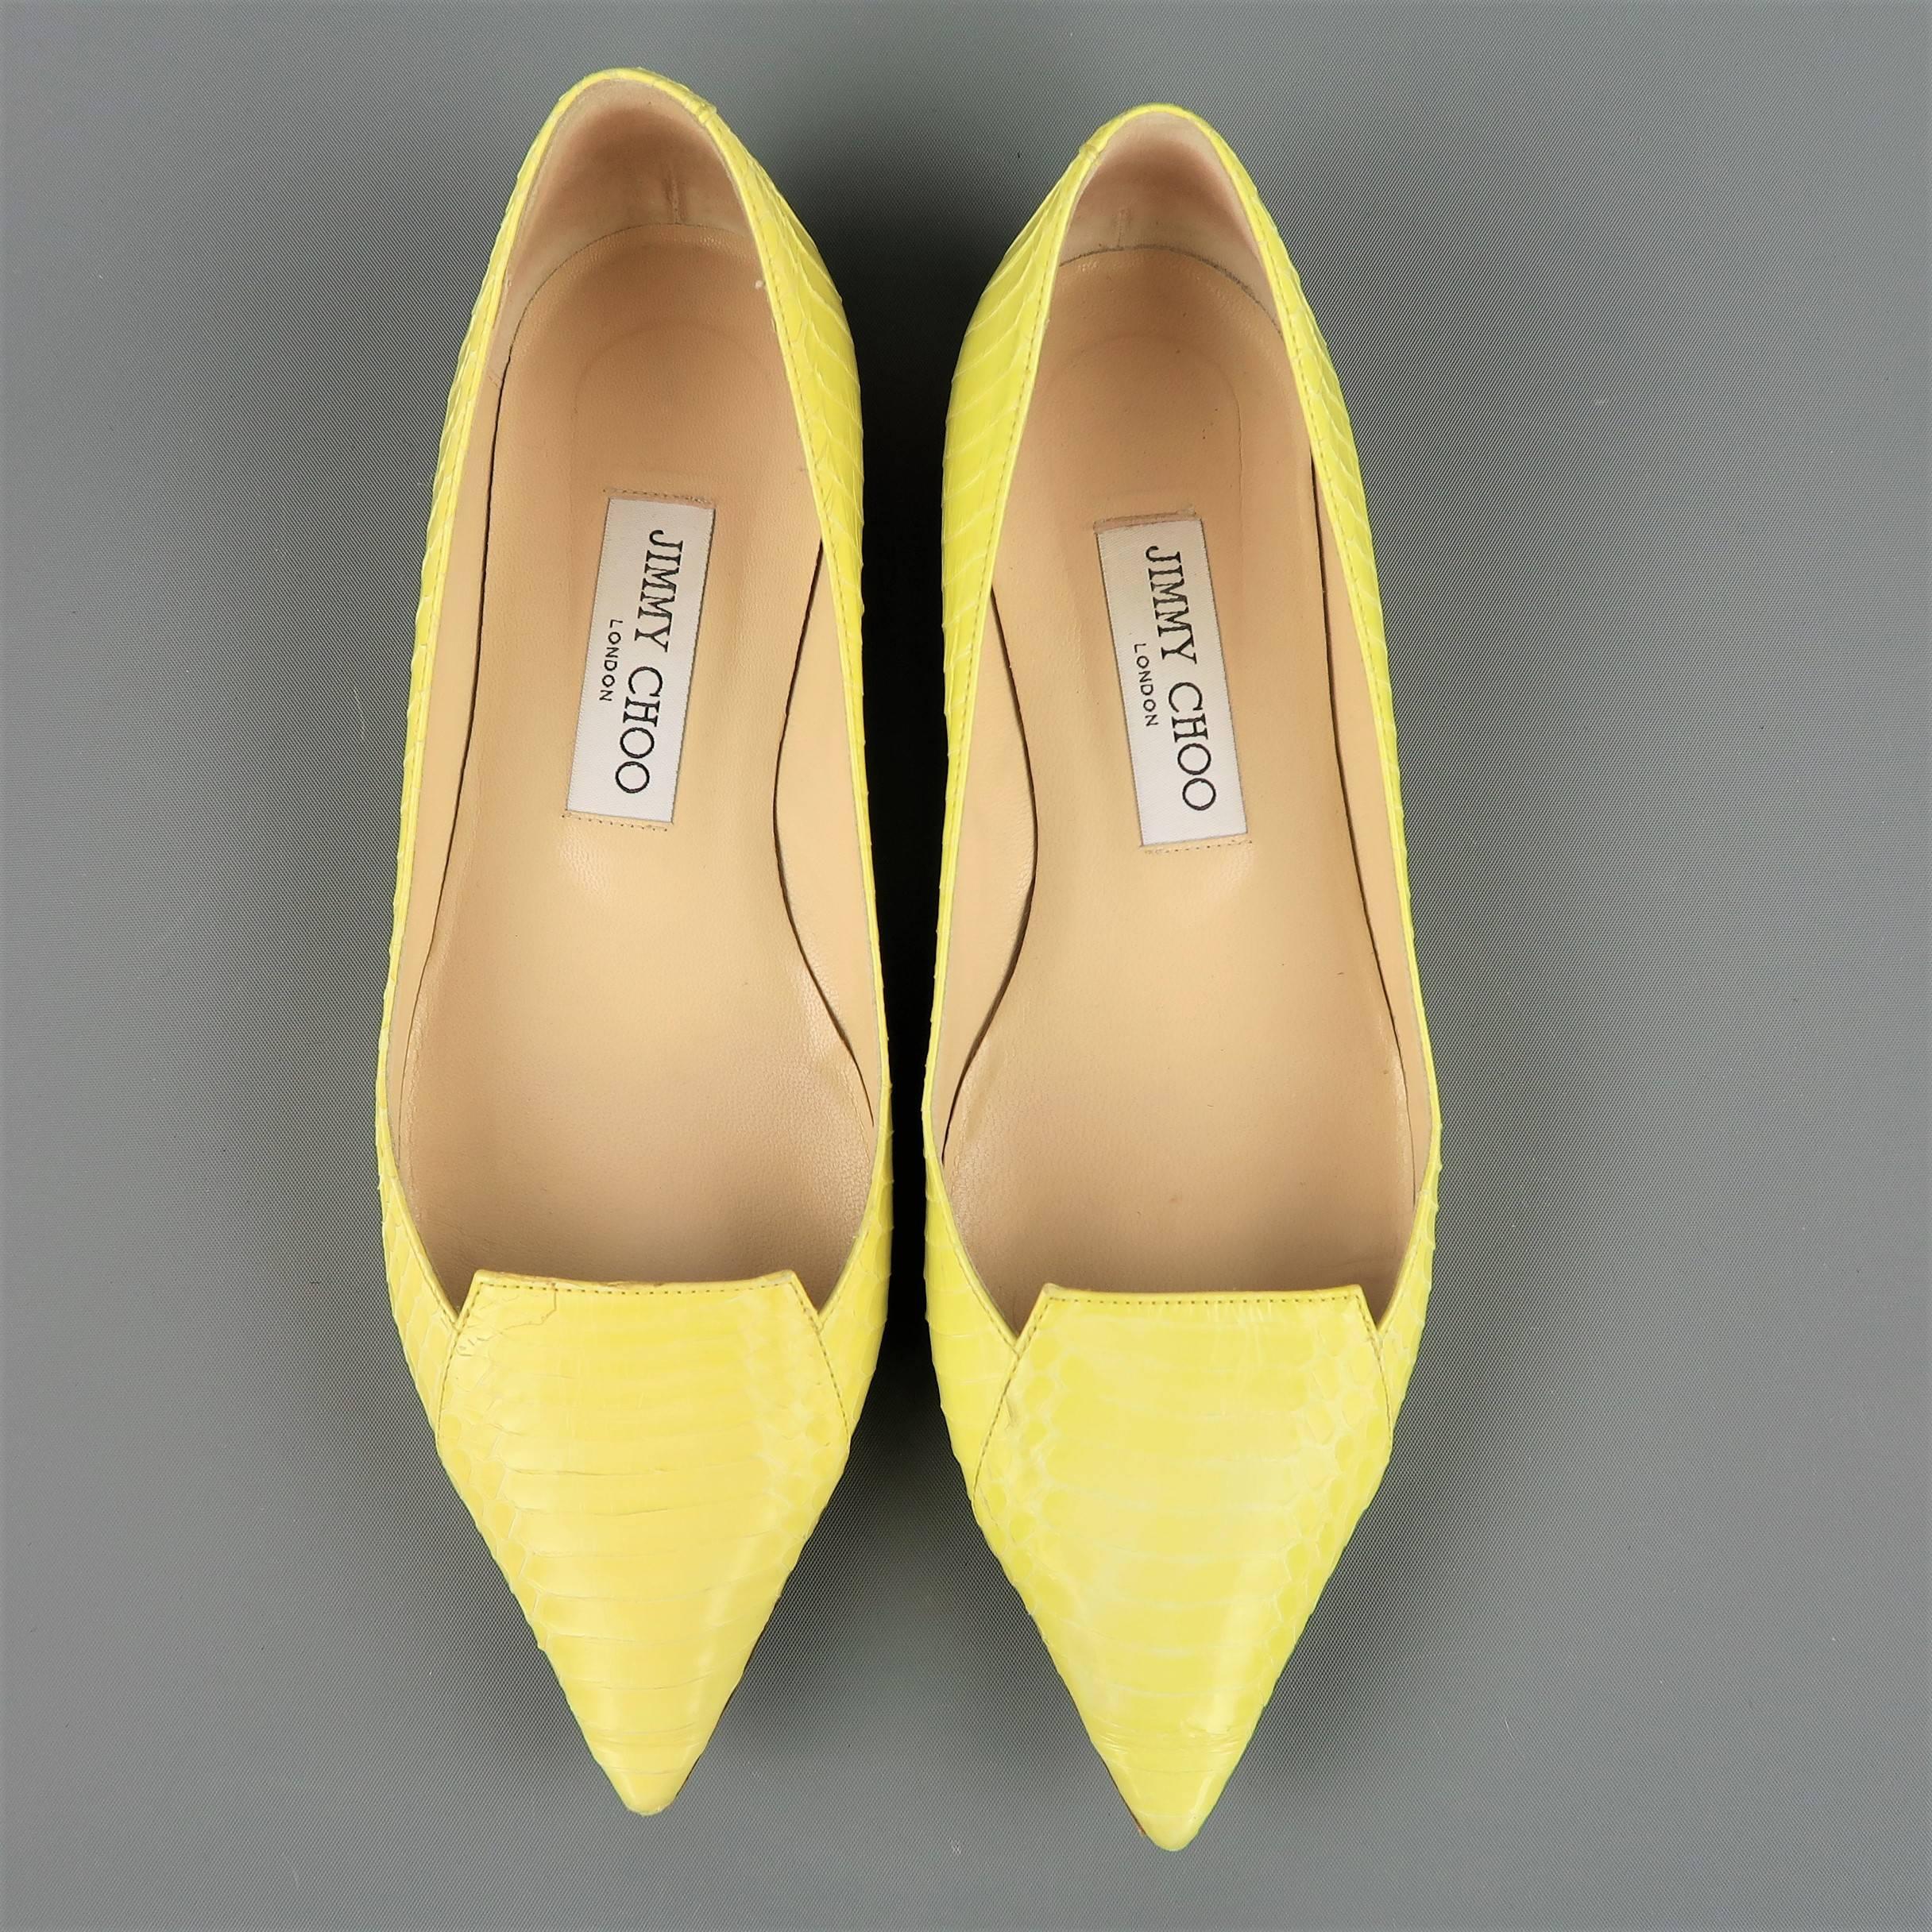 JIMMY CHOO flats come in light yellow snakeskin leather with a pointed toe and loafer toe line.Made in Italy.
 
Good Pre-Owned Condition.
Marked: IT 37
 
Measurements:
 
Outsole: 10.5 x 3 in.
